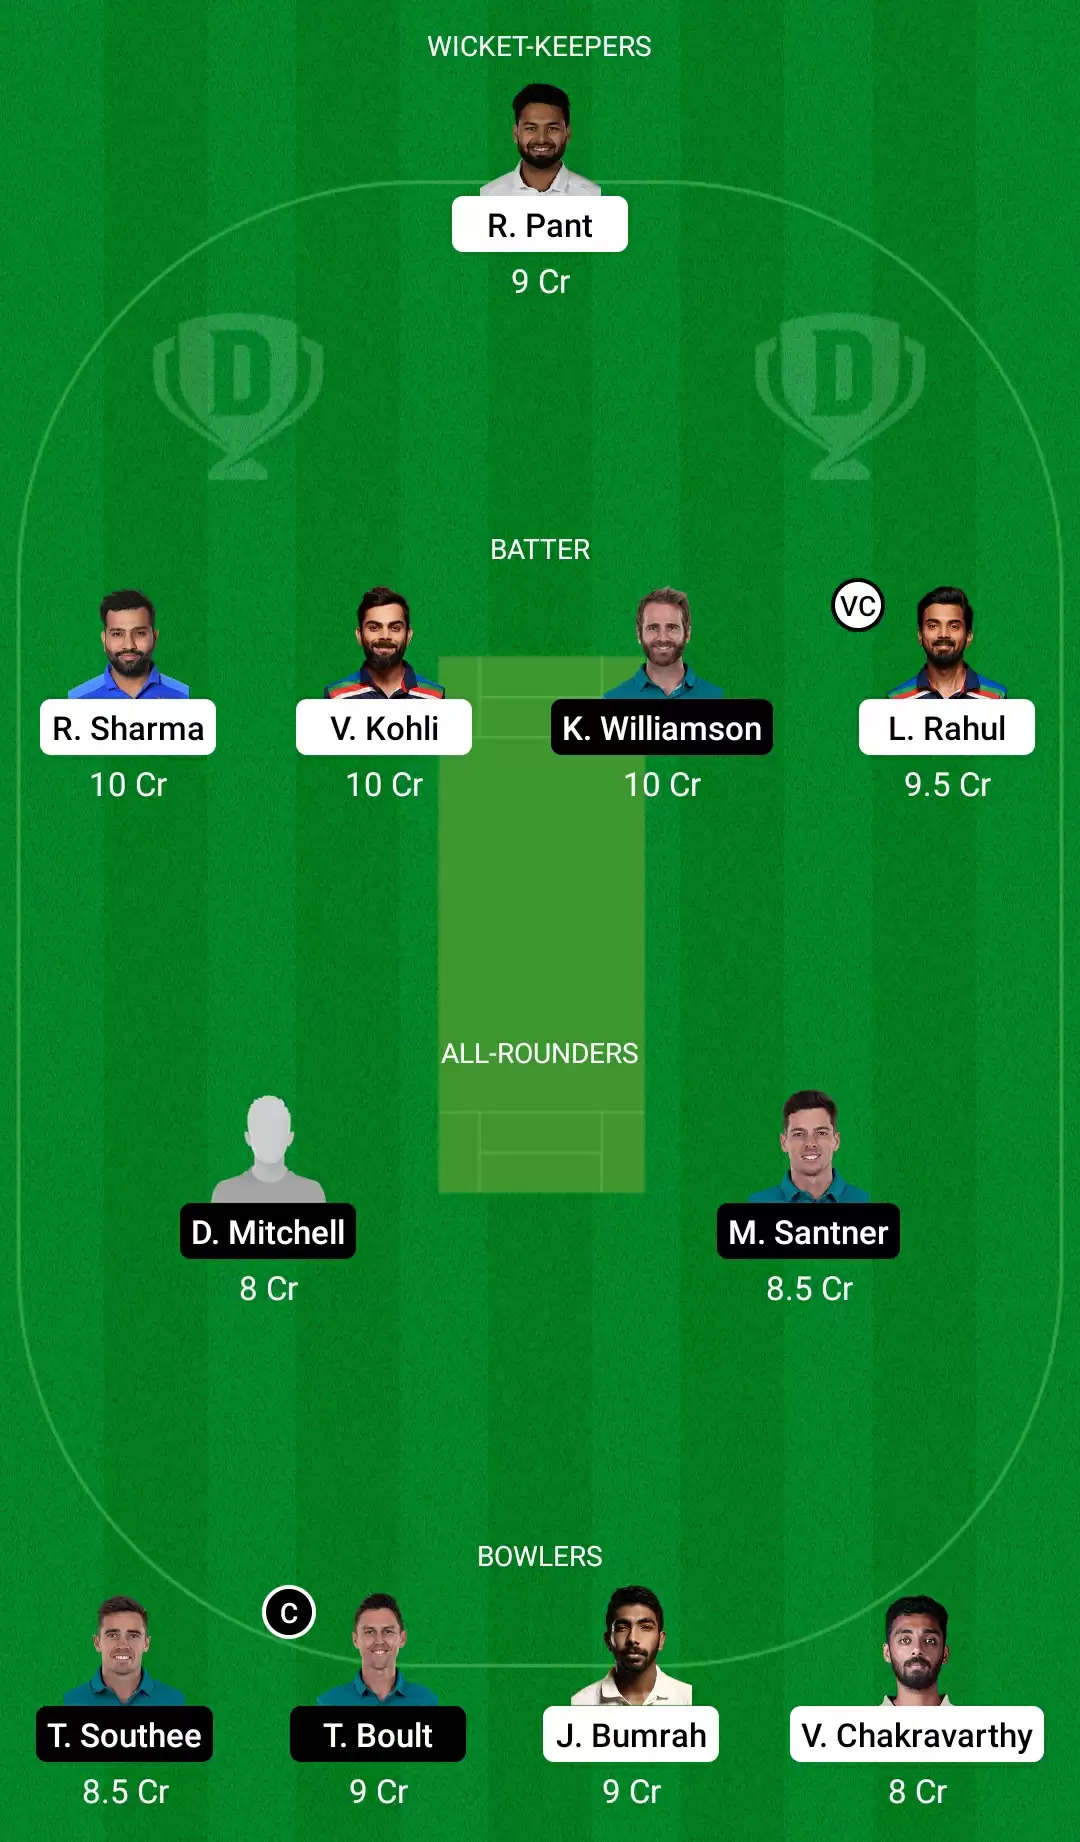 IND vs NZ Dream11 Prediction for T20 World Cup 2021: Playing XI, Fantasy Cricket Tips, Team, Weather Updates and Pitch Report